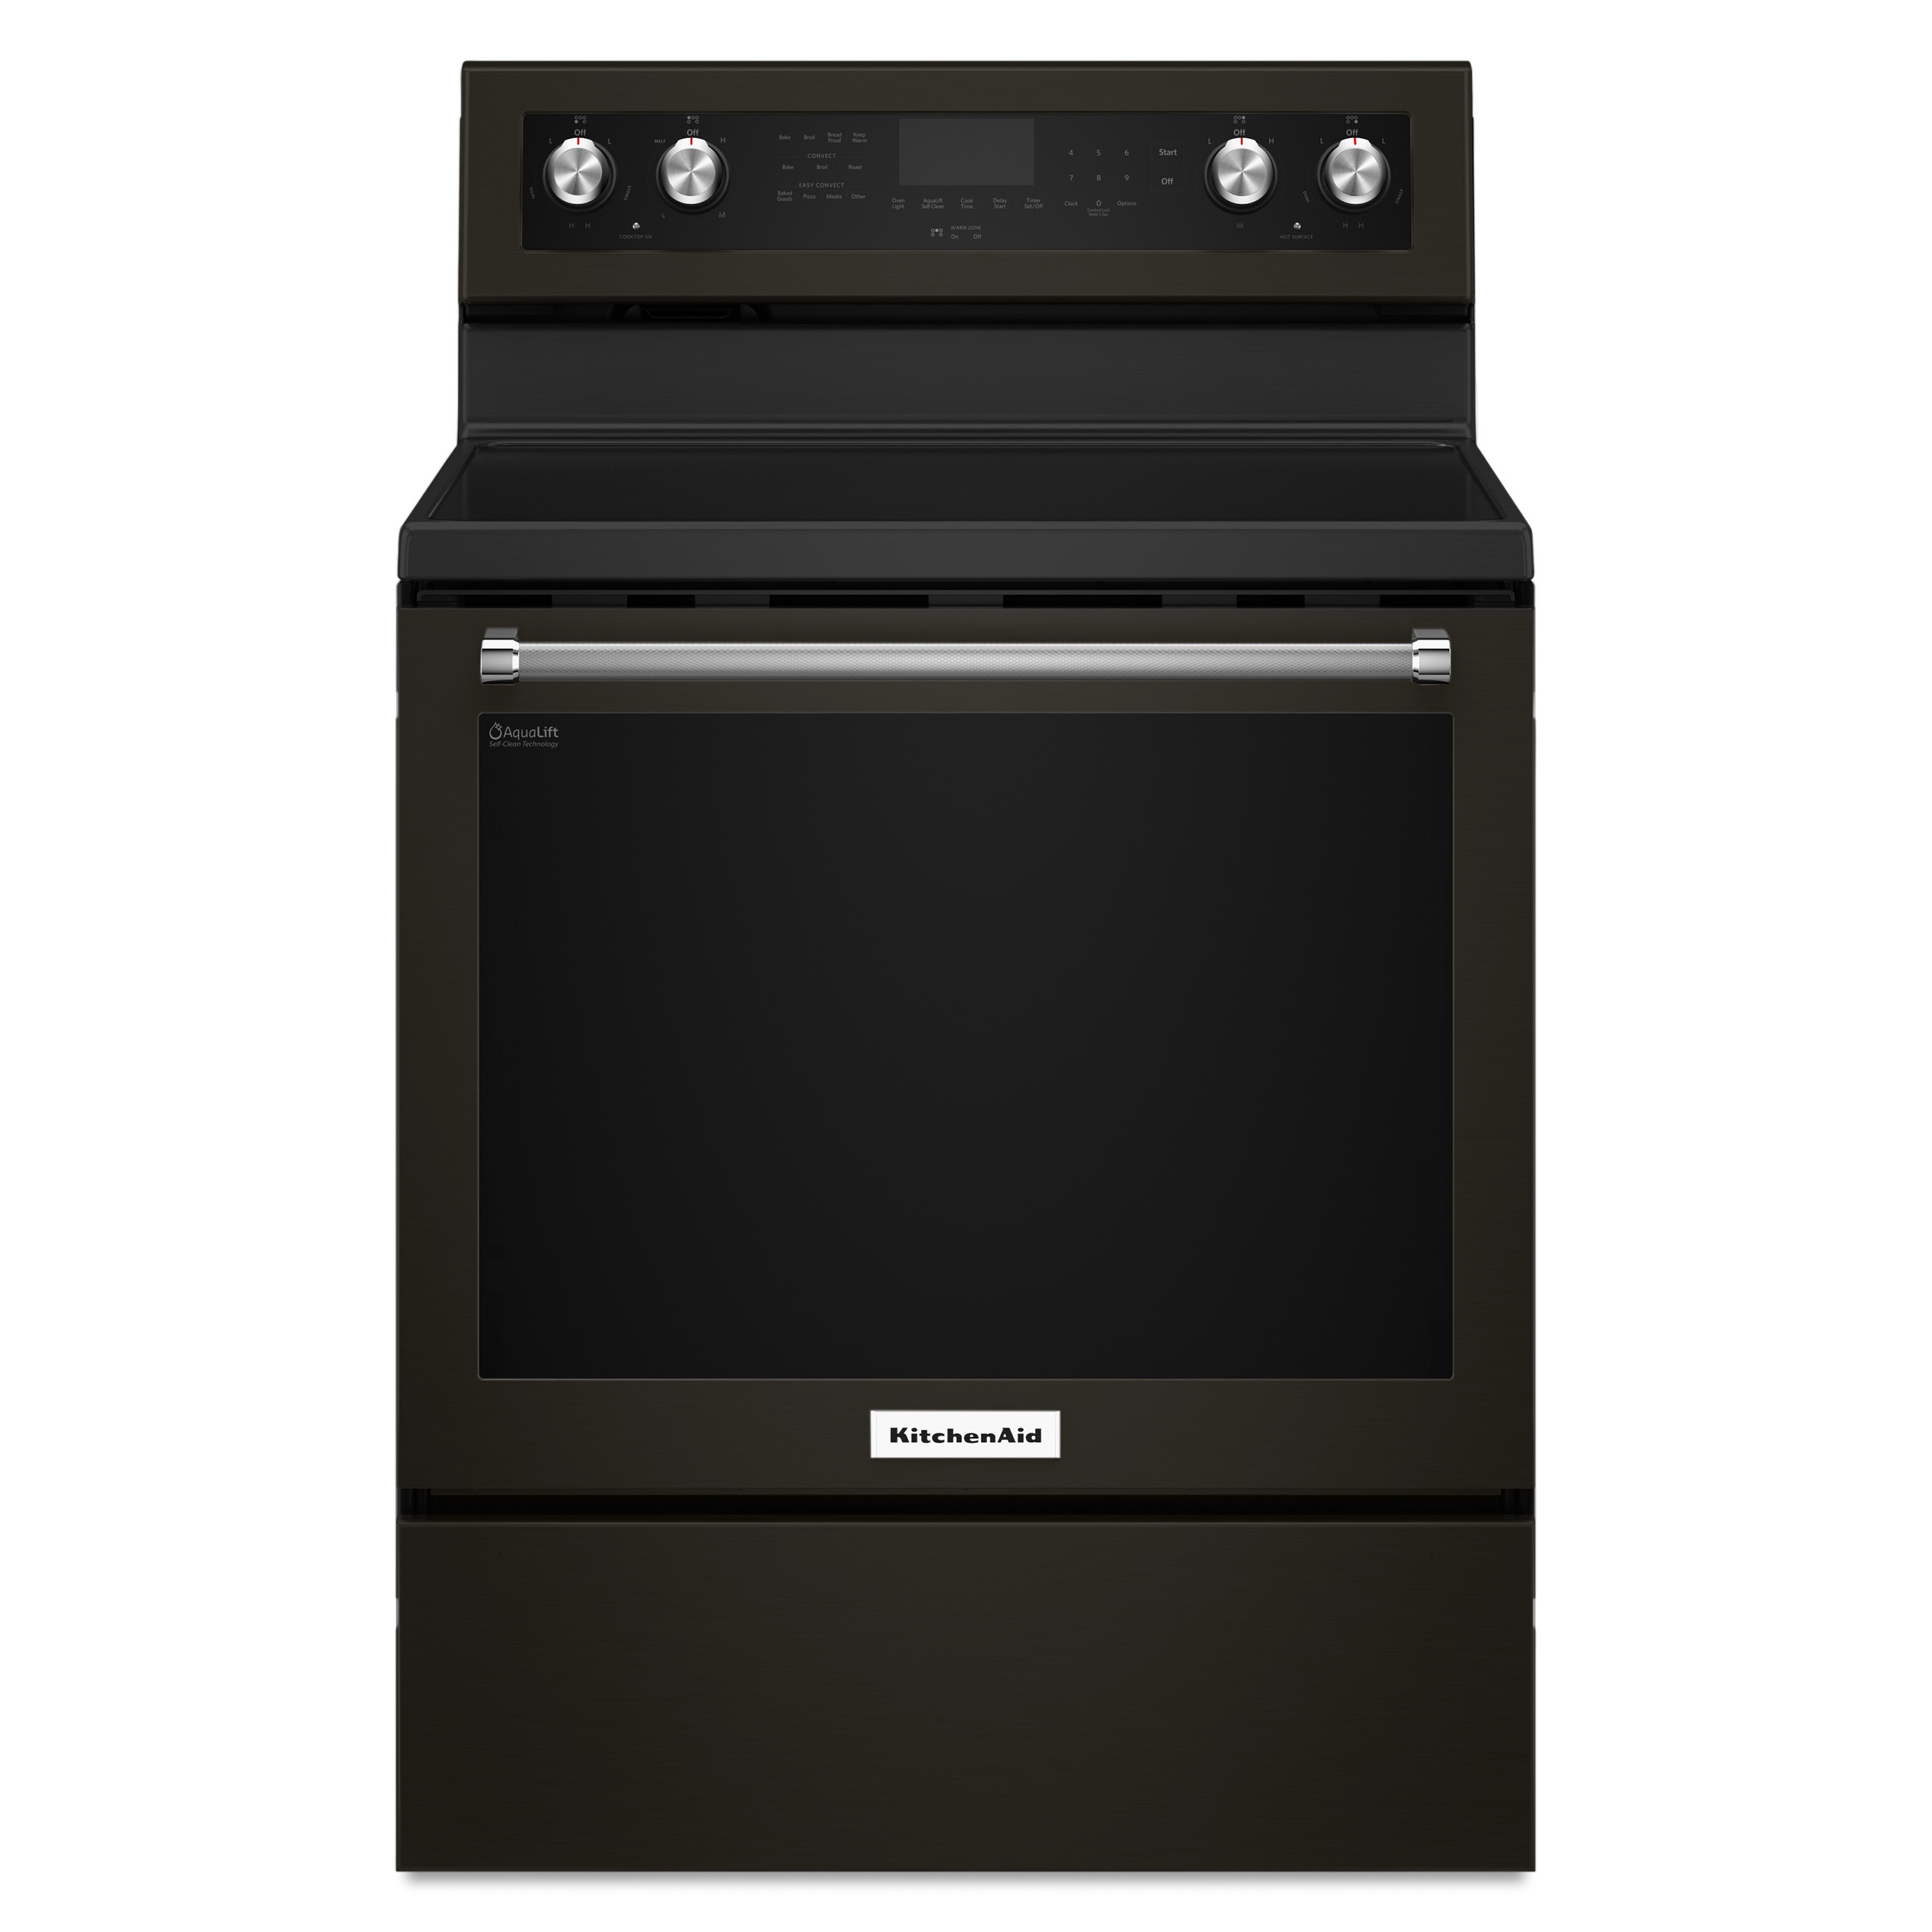 KitchenAid is expanding its popular line of black stainless major appliances to include a number of new built-in and freestanding ranges and refrigerators.